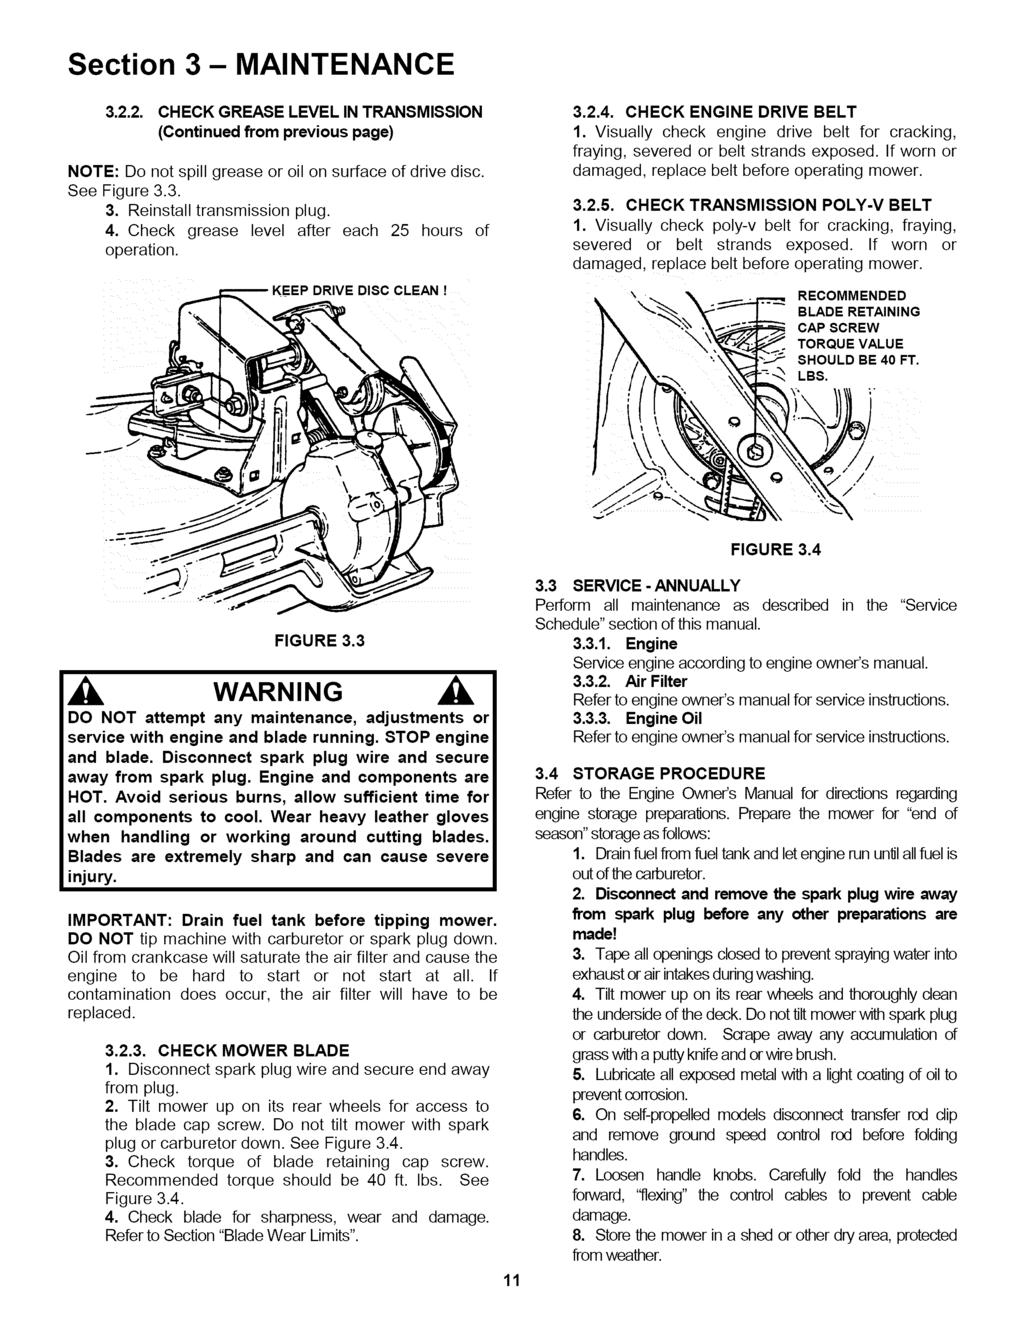 Section 3- MAINTENANCE 3.2.2. CHECK GREASE LEVEL IN TRANSMISSION (Continued from previous page) NOTE: Do not spill grease or oil on surface of drive disc. See Figure 3.3. 3. Reinstall transmission plug.